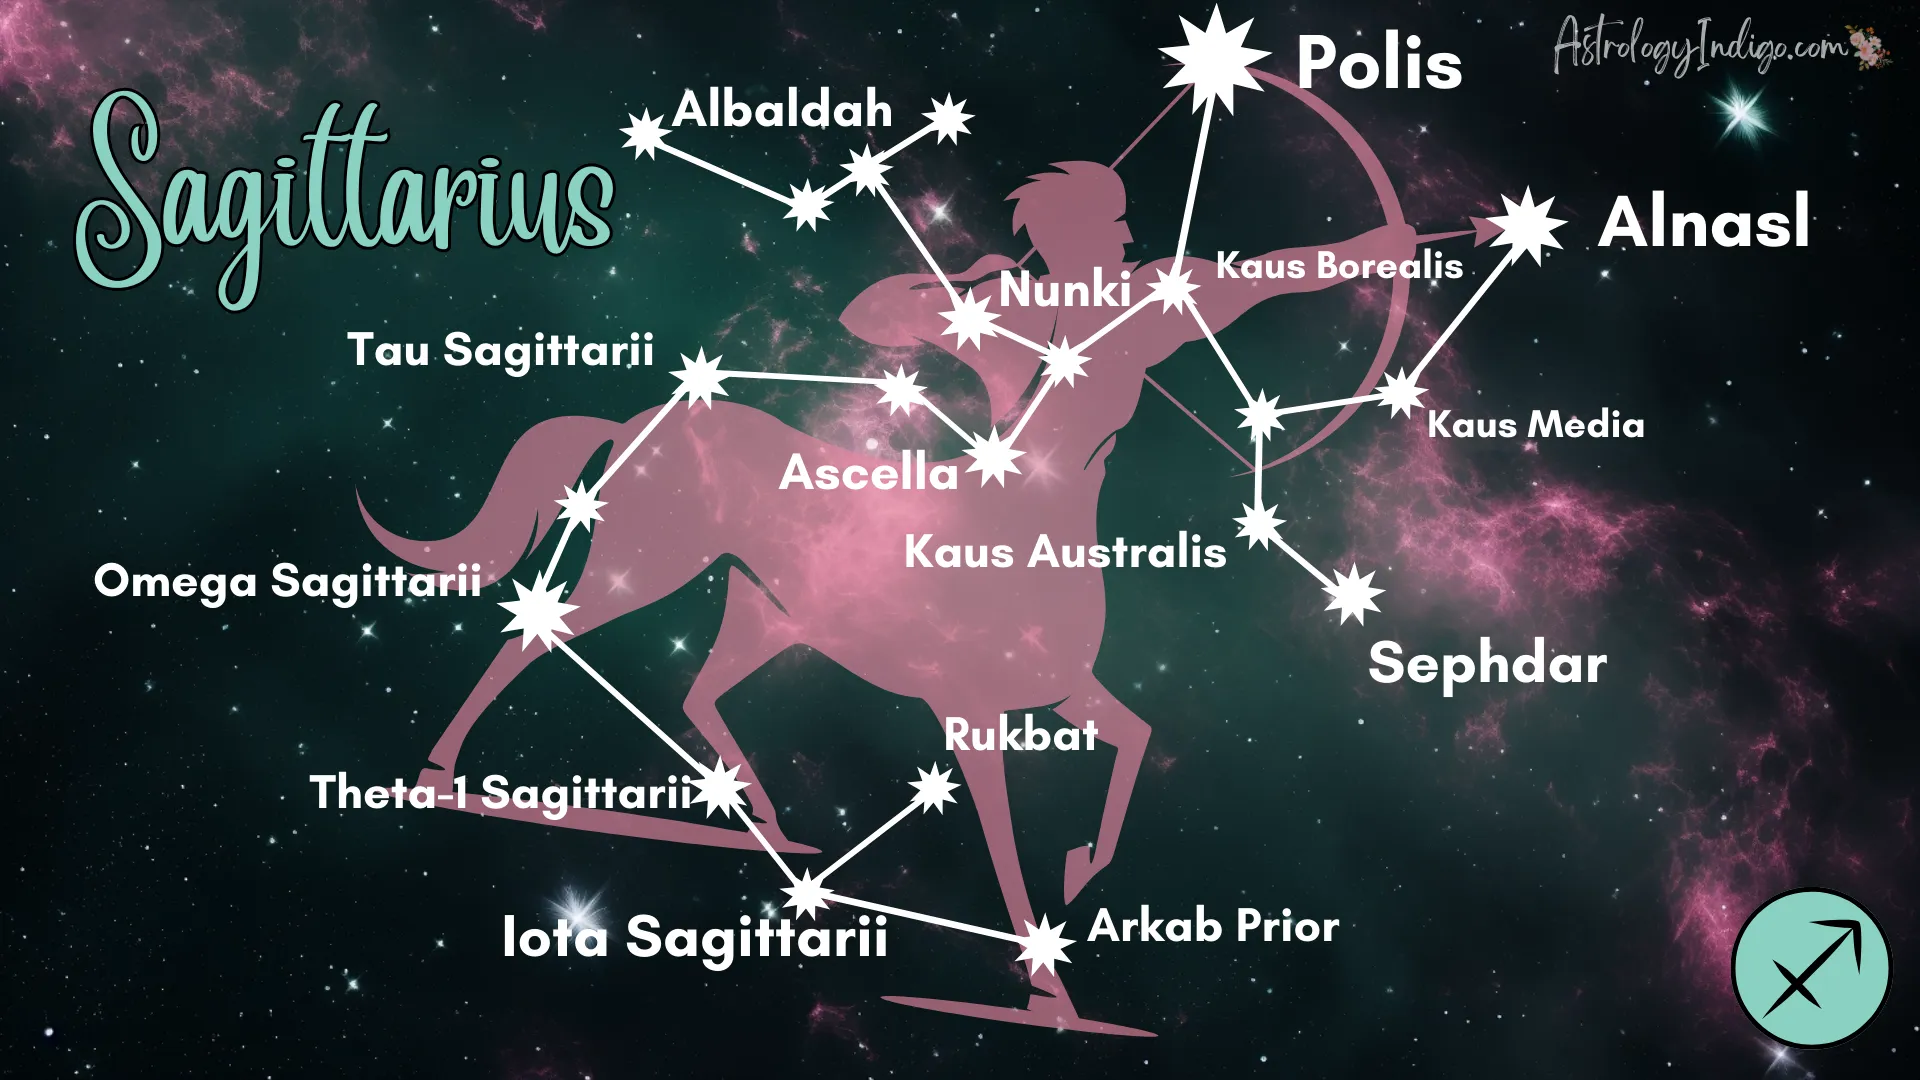 The Sagittarius constellation with information about the stars and a pink image of a centaur behind it.